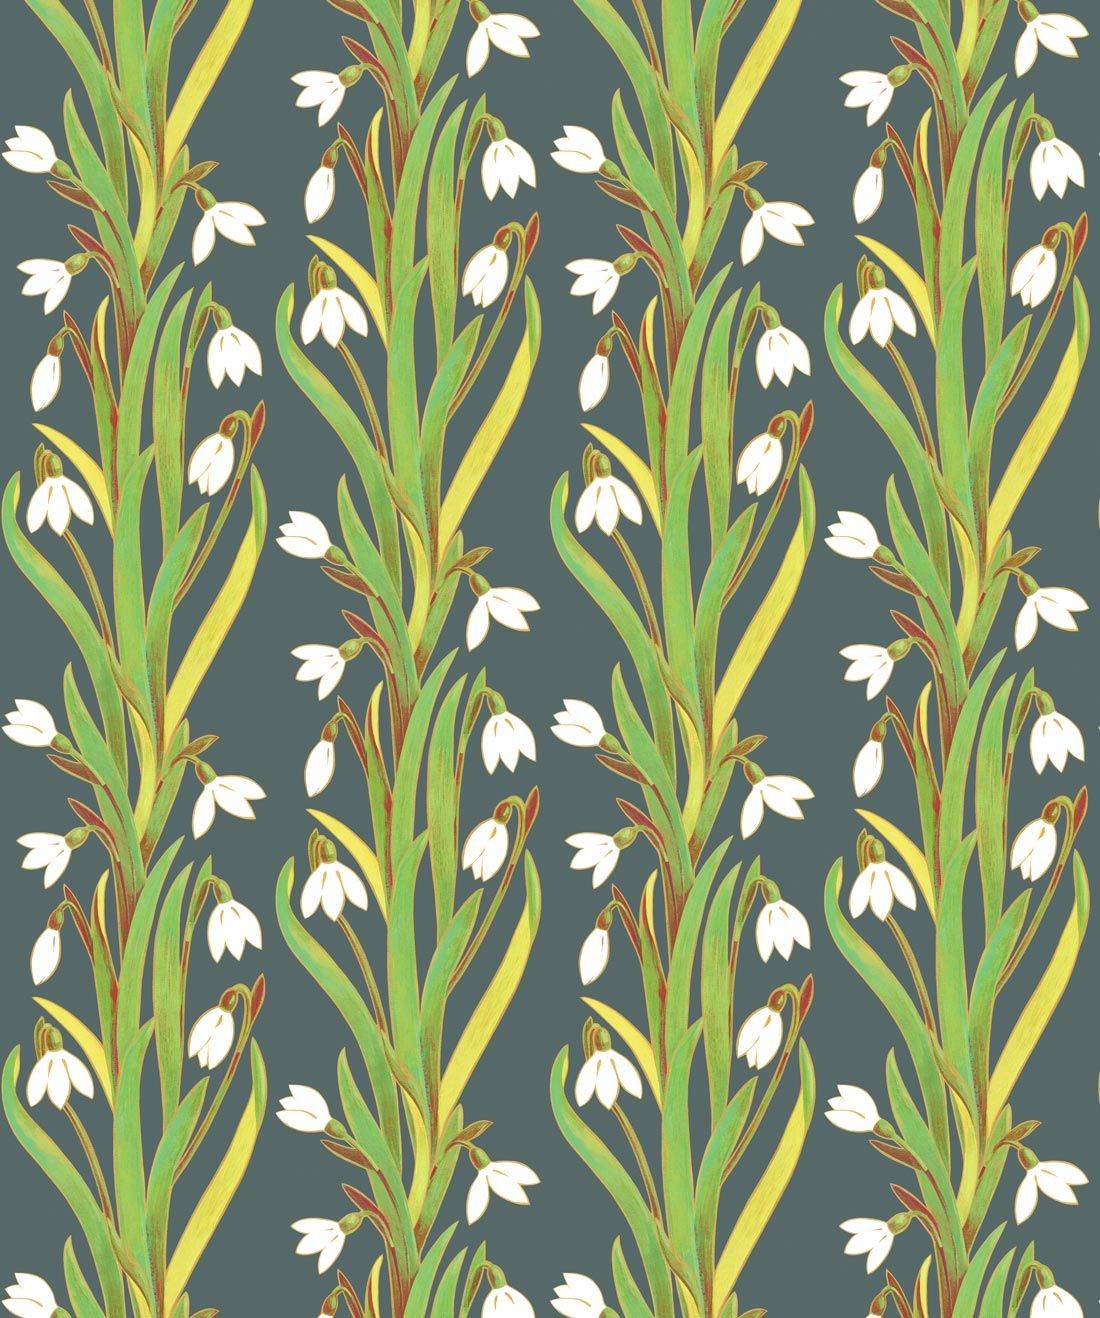 Snow Drop in Green Beret is a Botanical Trail Wallpaper